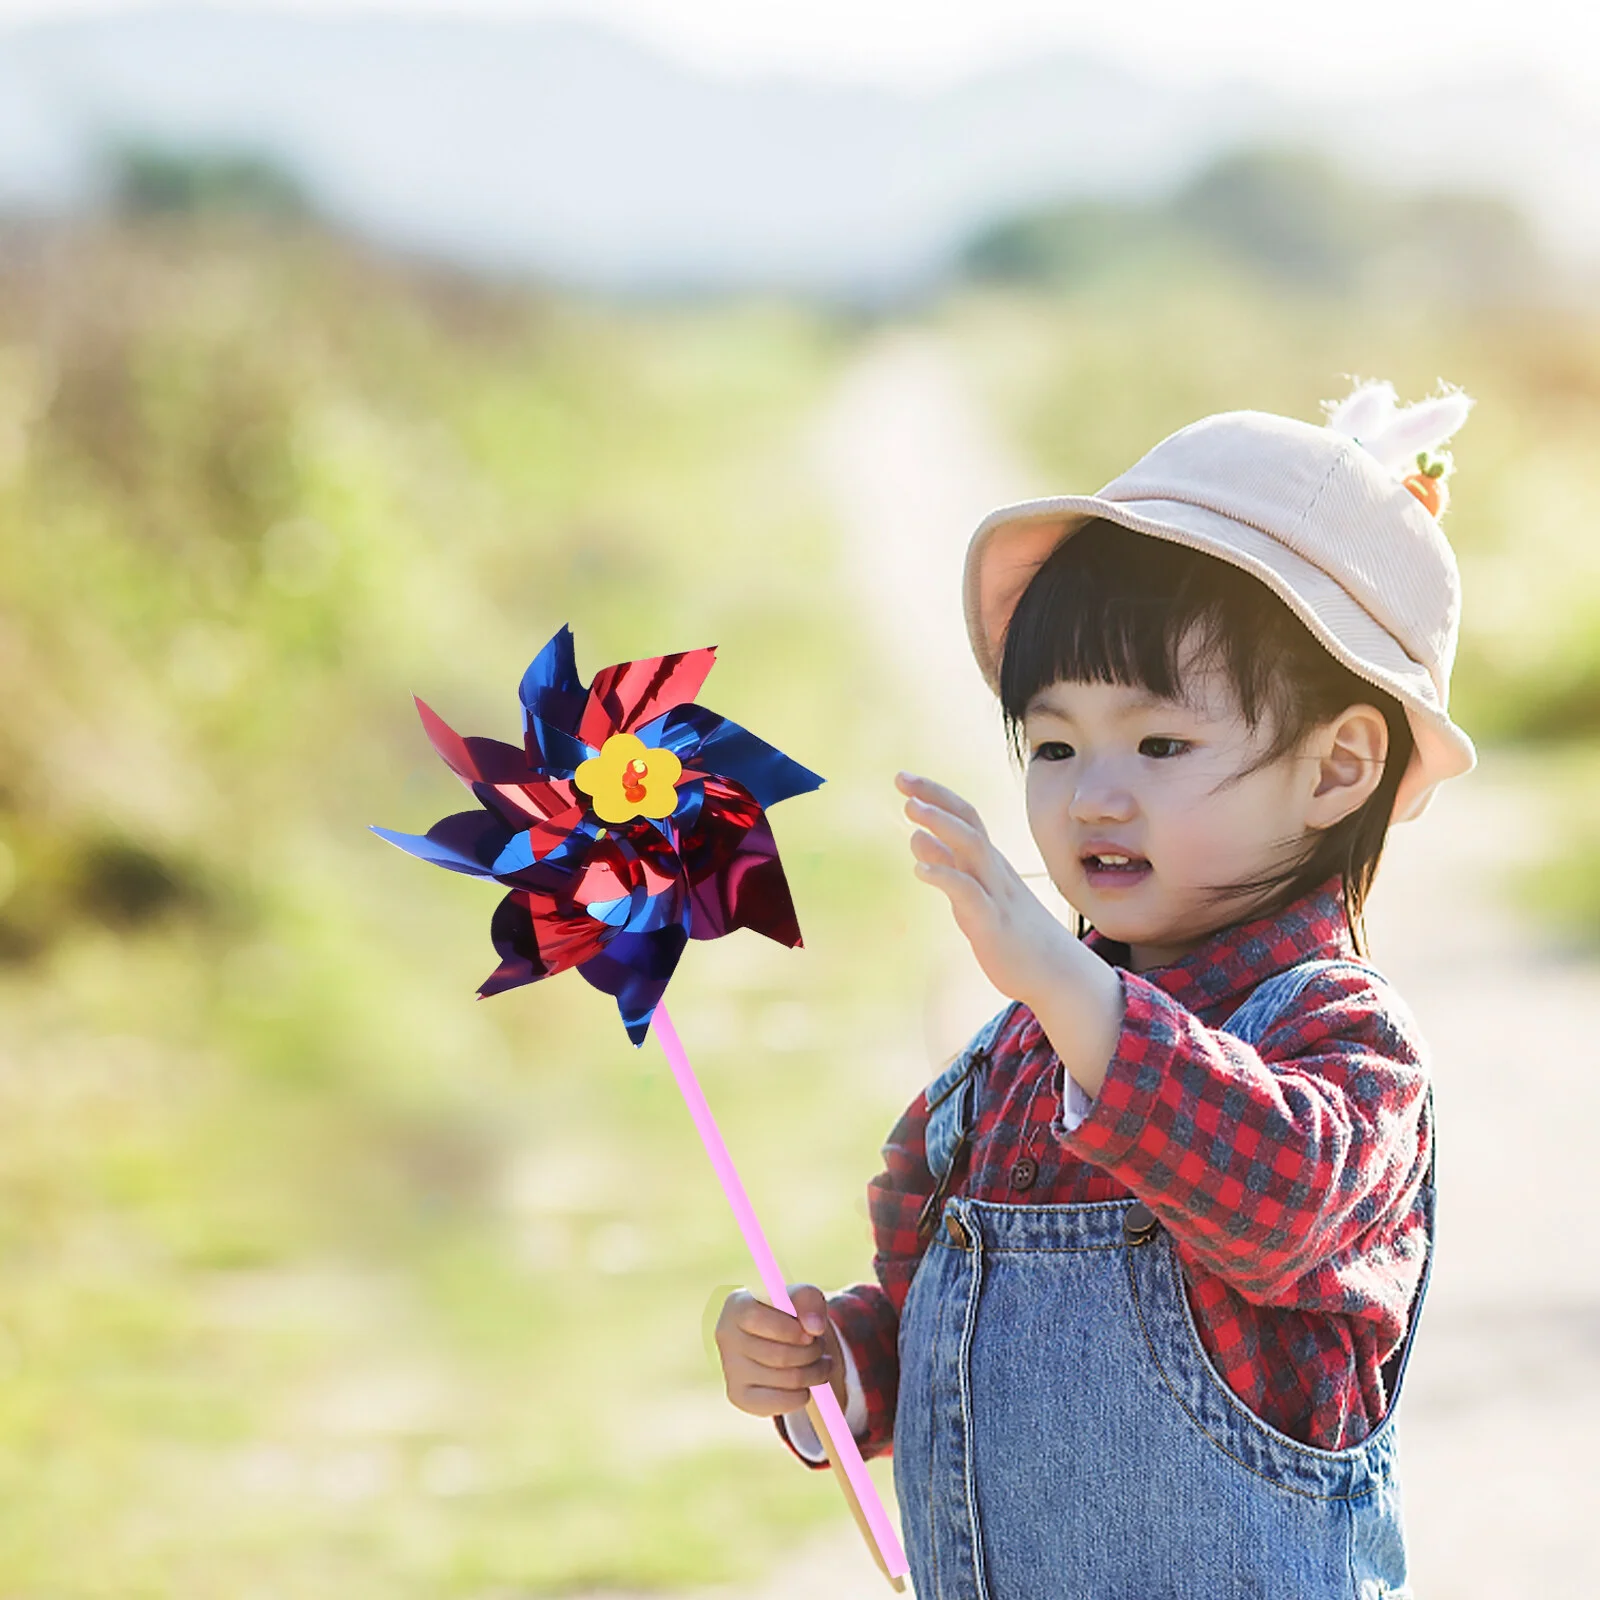 

20 Pcs Small Windmill Toy Outdoor Play Toys Kids Decorate Pinwheel Colorful DIY Child Mini